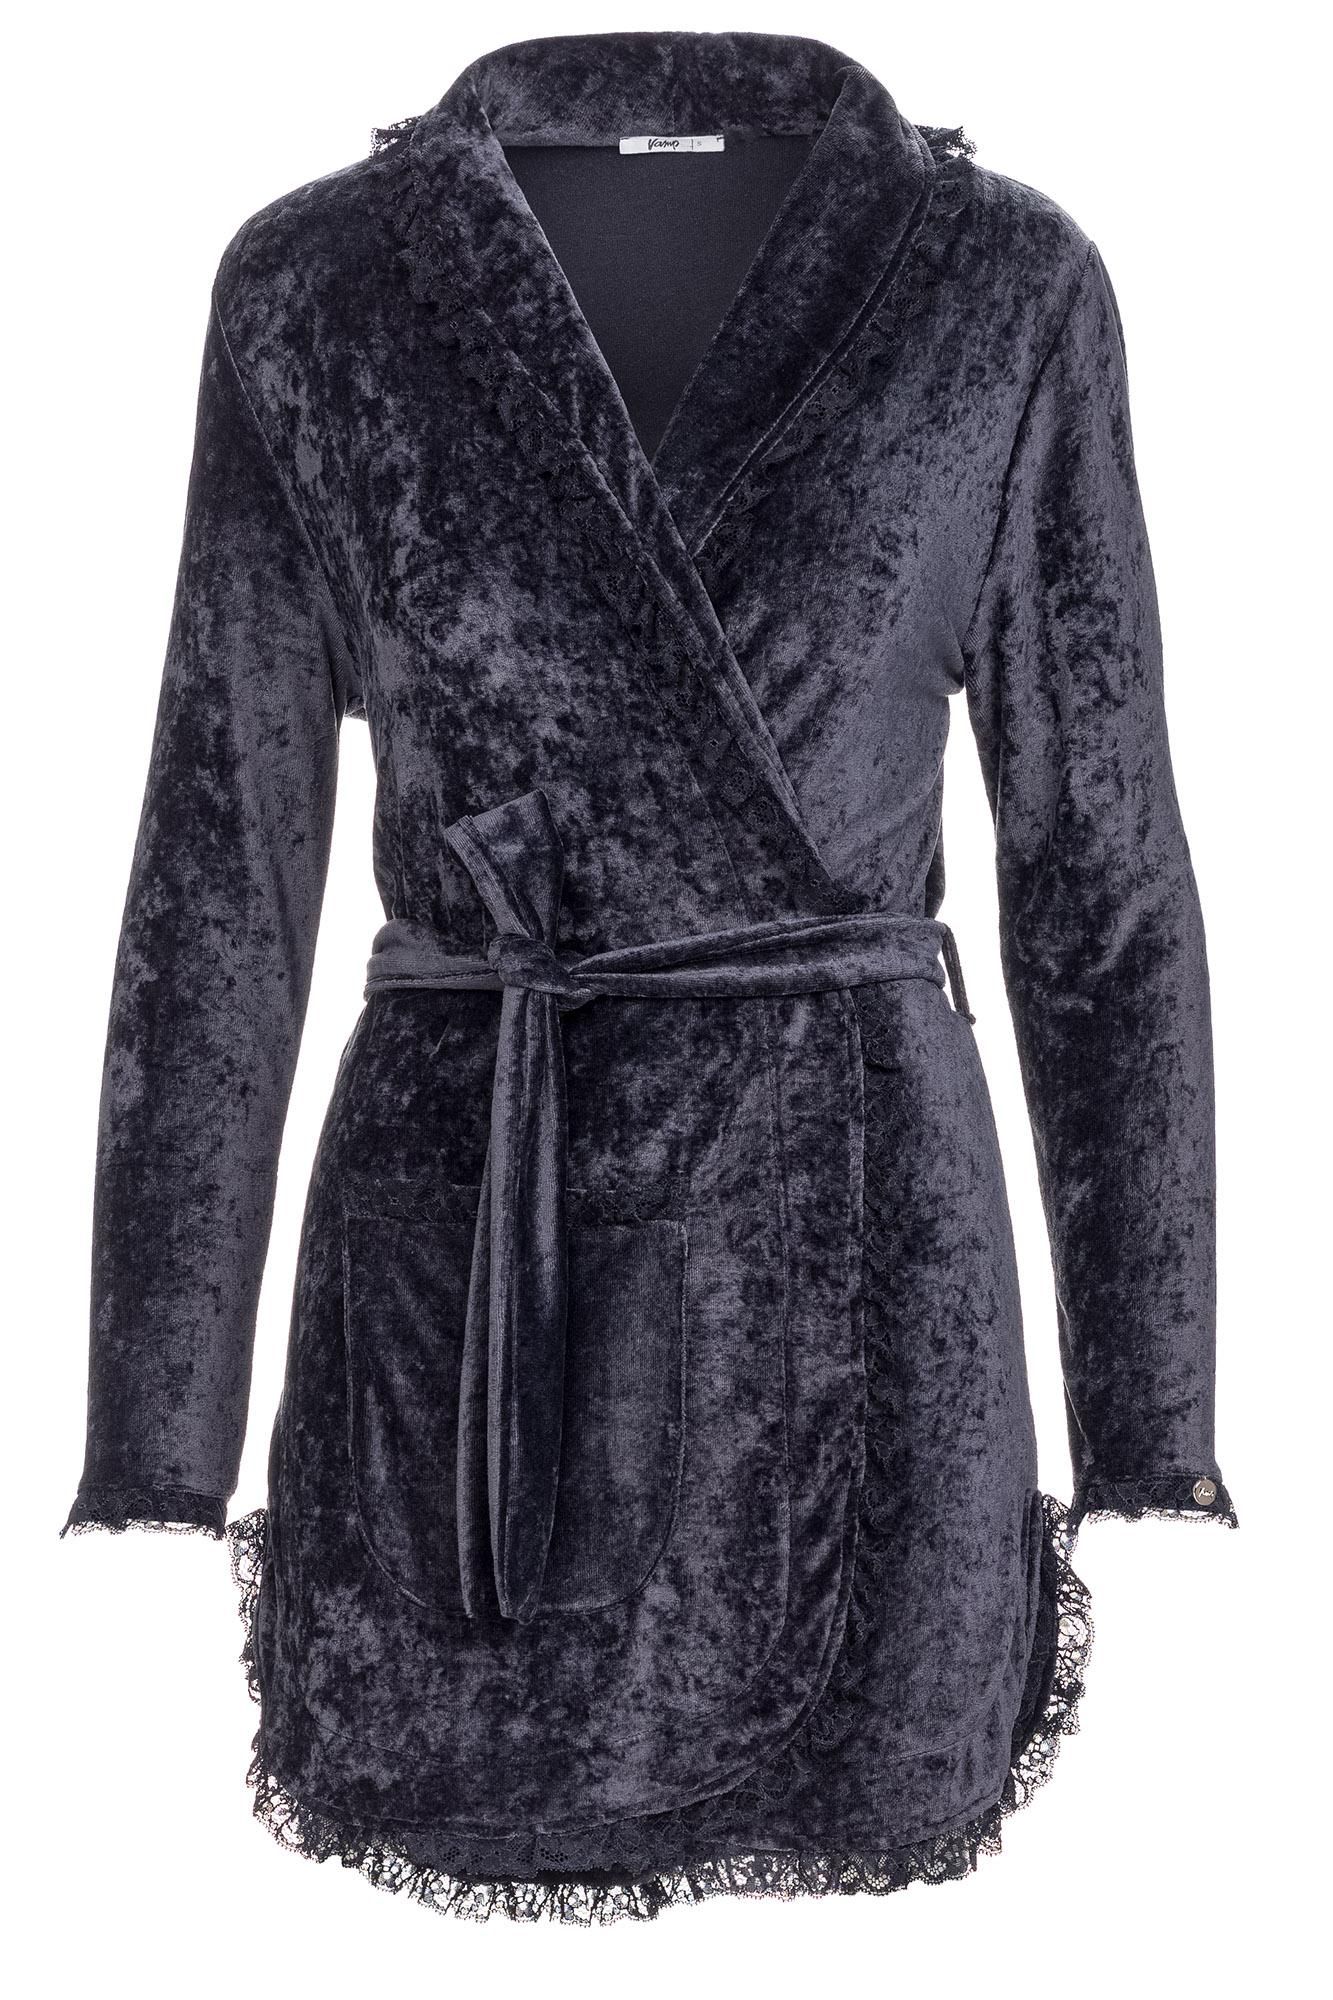 Women’s Velour Robe with Lace Details